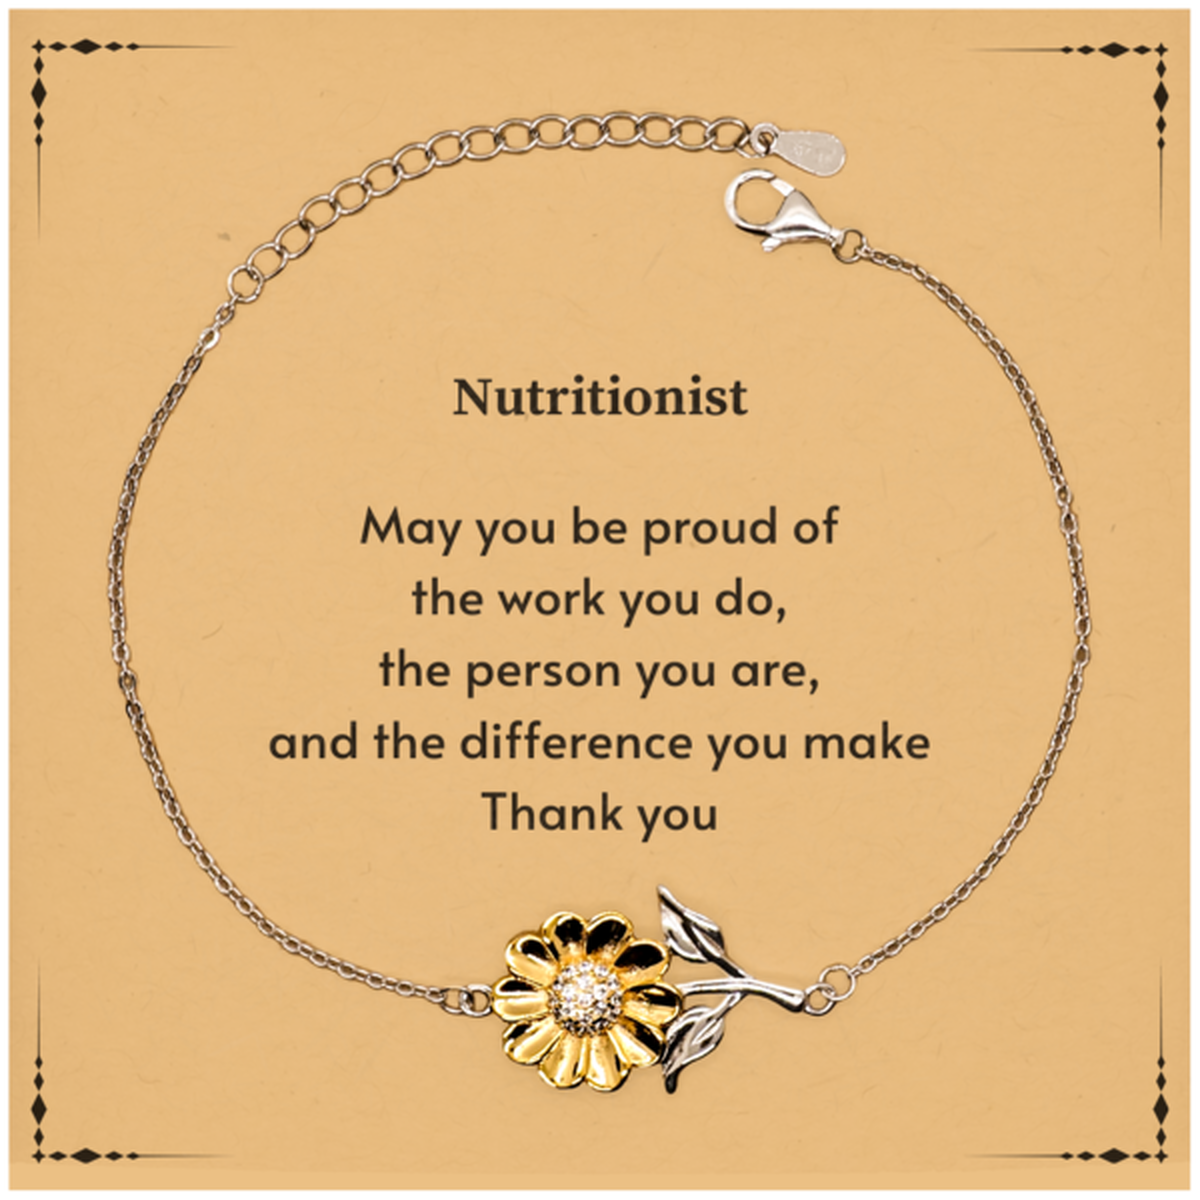 Heartwarming Sunflower Bracelet Retirement Coworkers Gifts for Nutritionist, Nutritionist May You be proud of the work you do, the person you are Gifts for Boss Men Women Friends